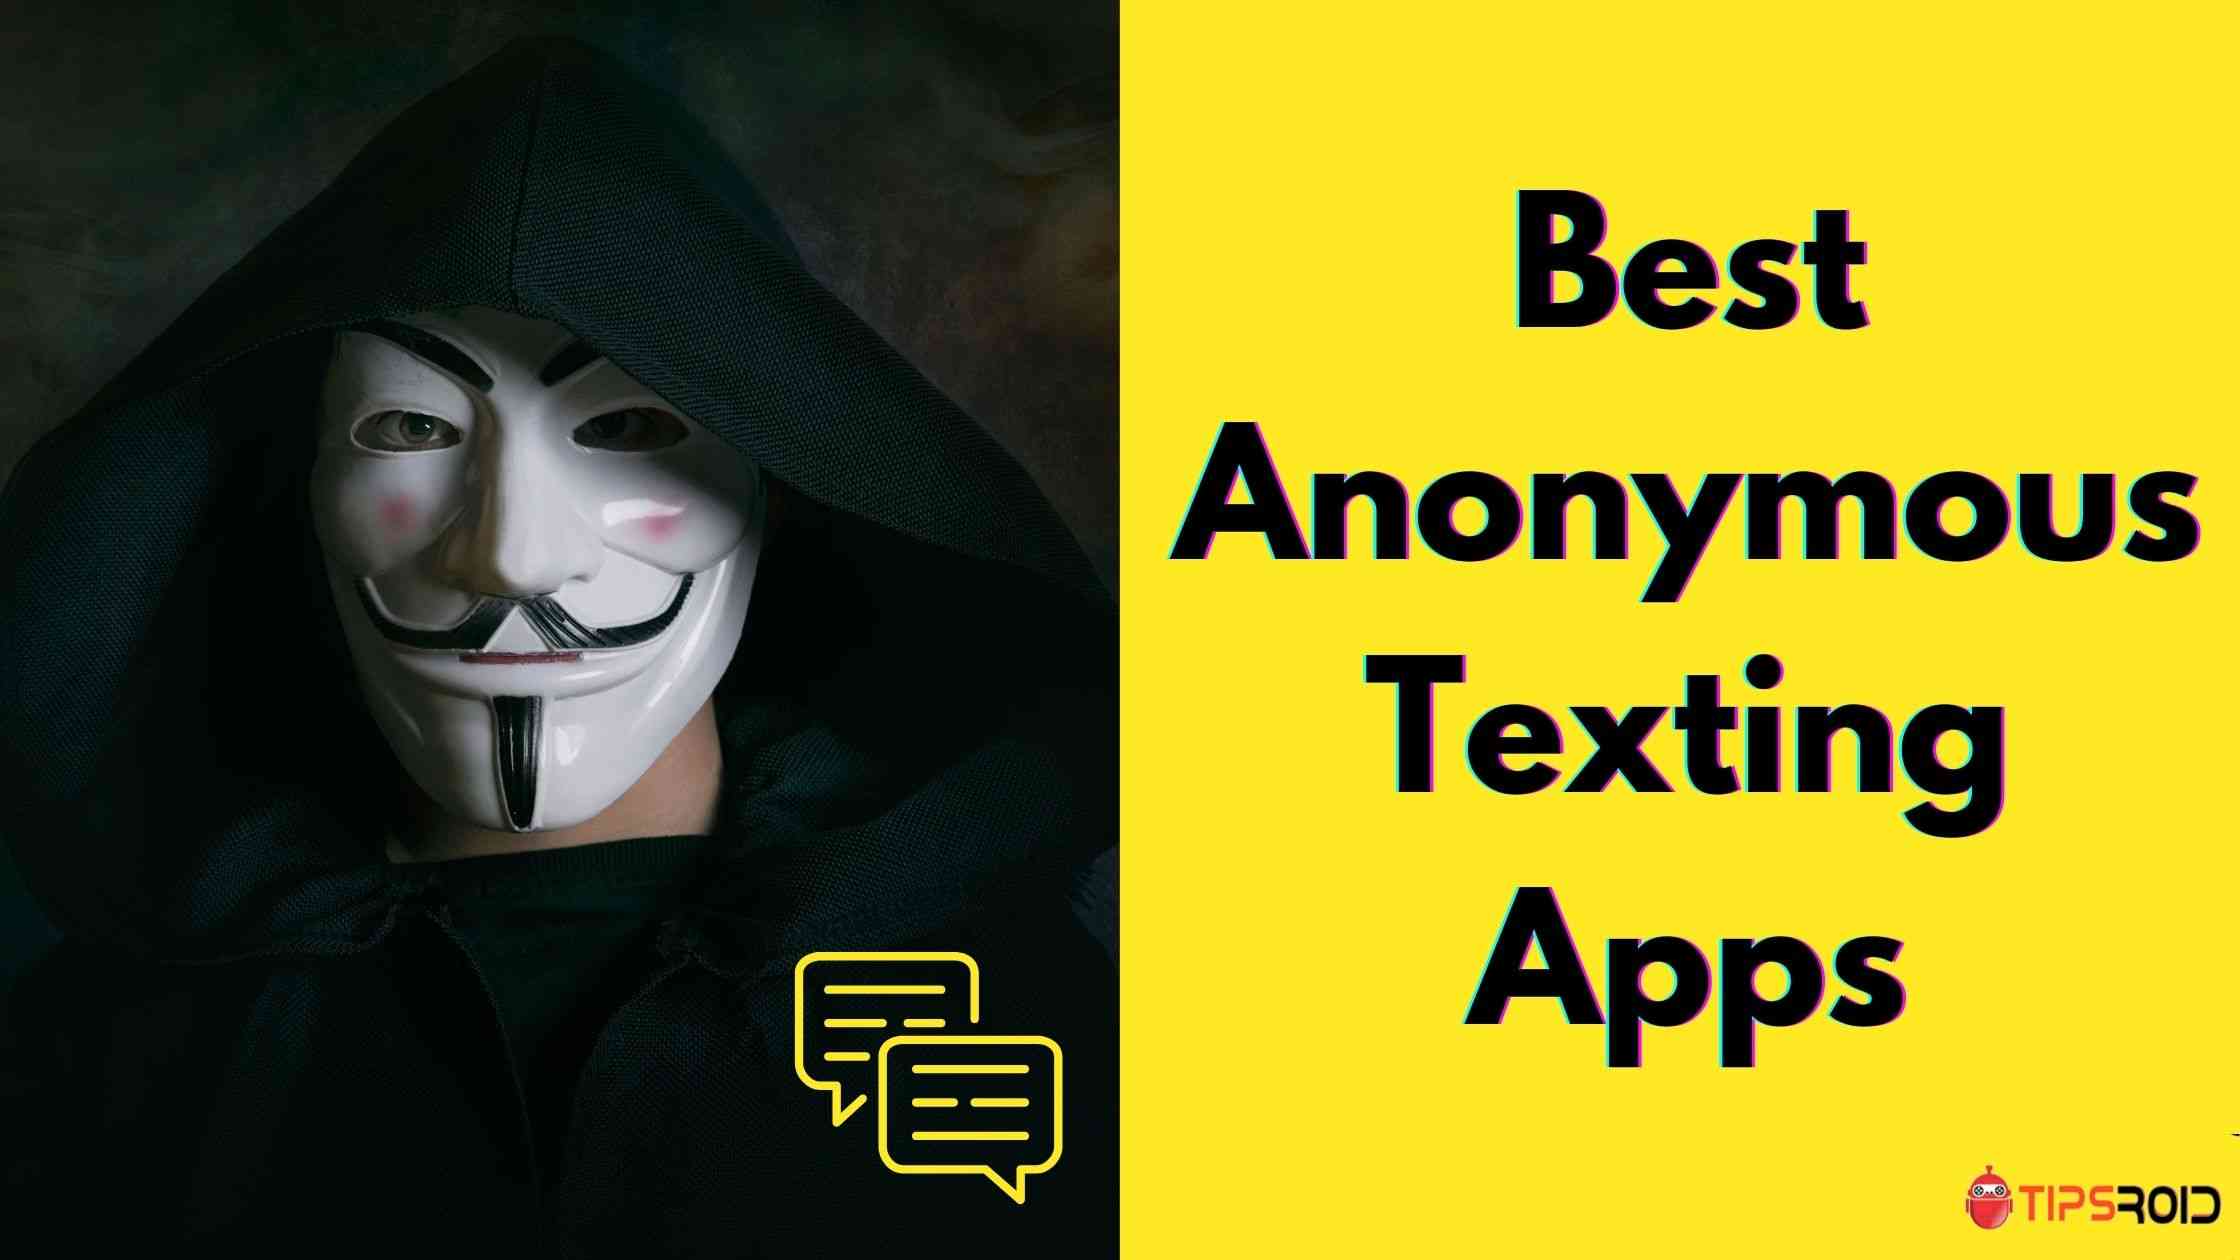 12 Best Anonymous Texting Apps and Websites